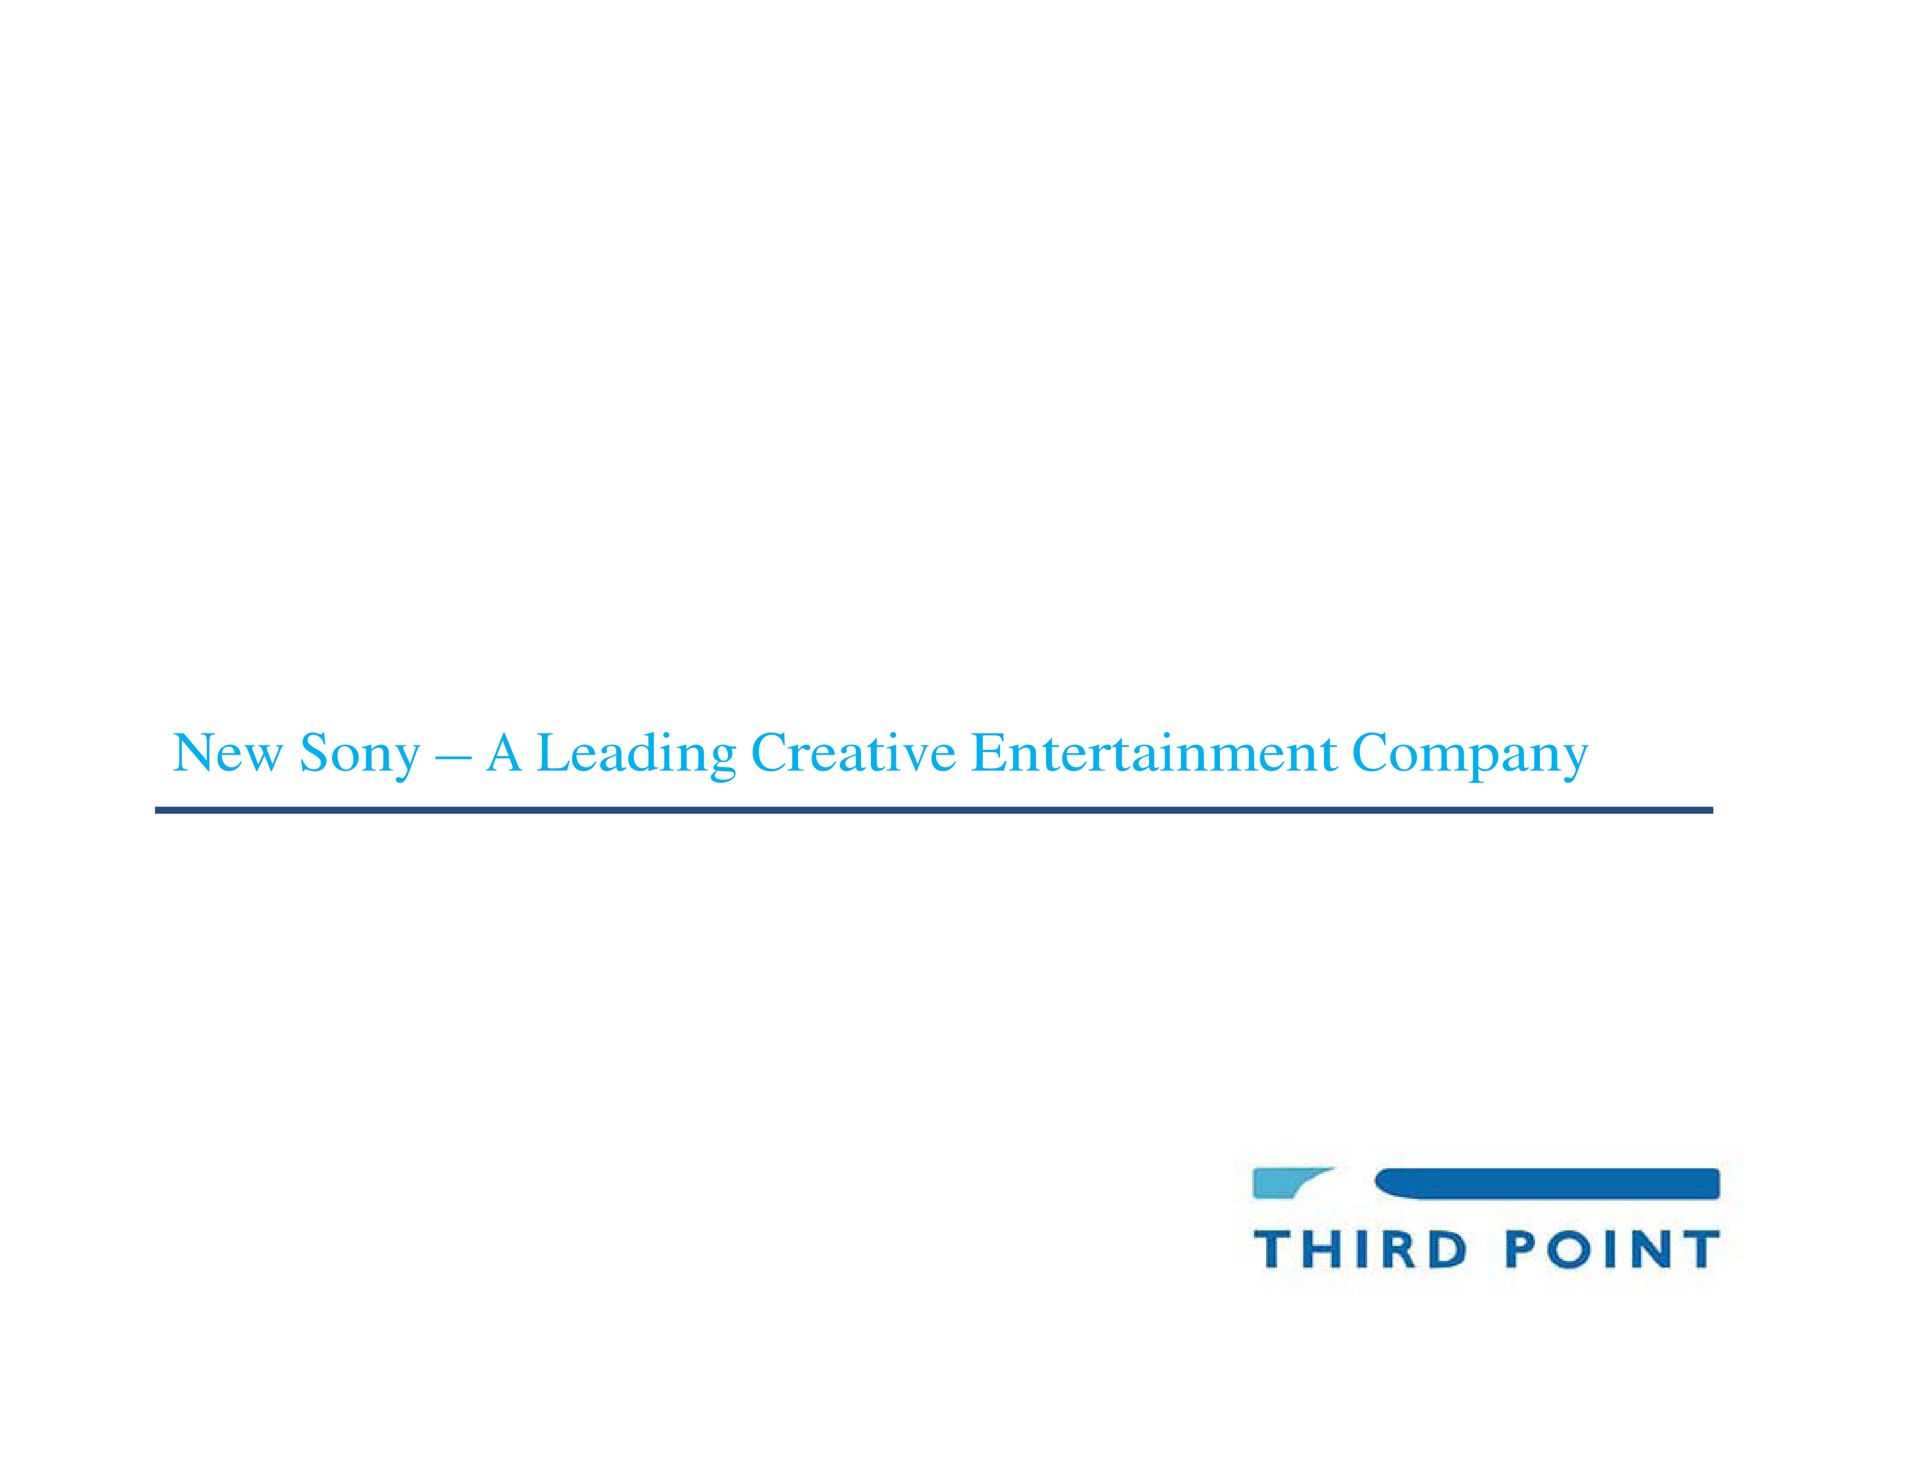 new a leading creative entertainment company third point | Third Point Management